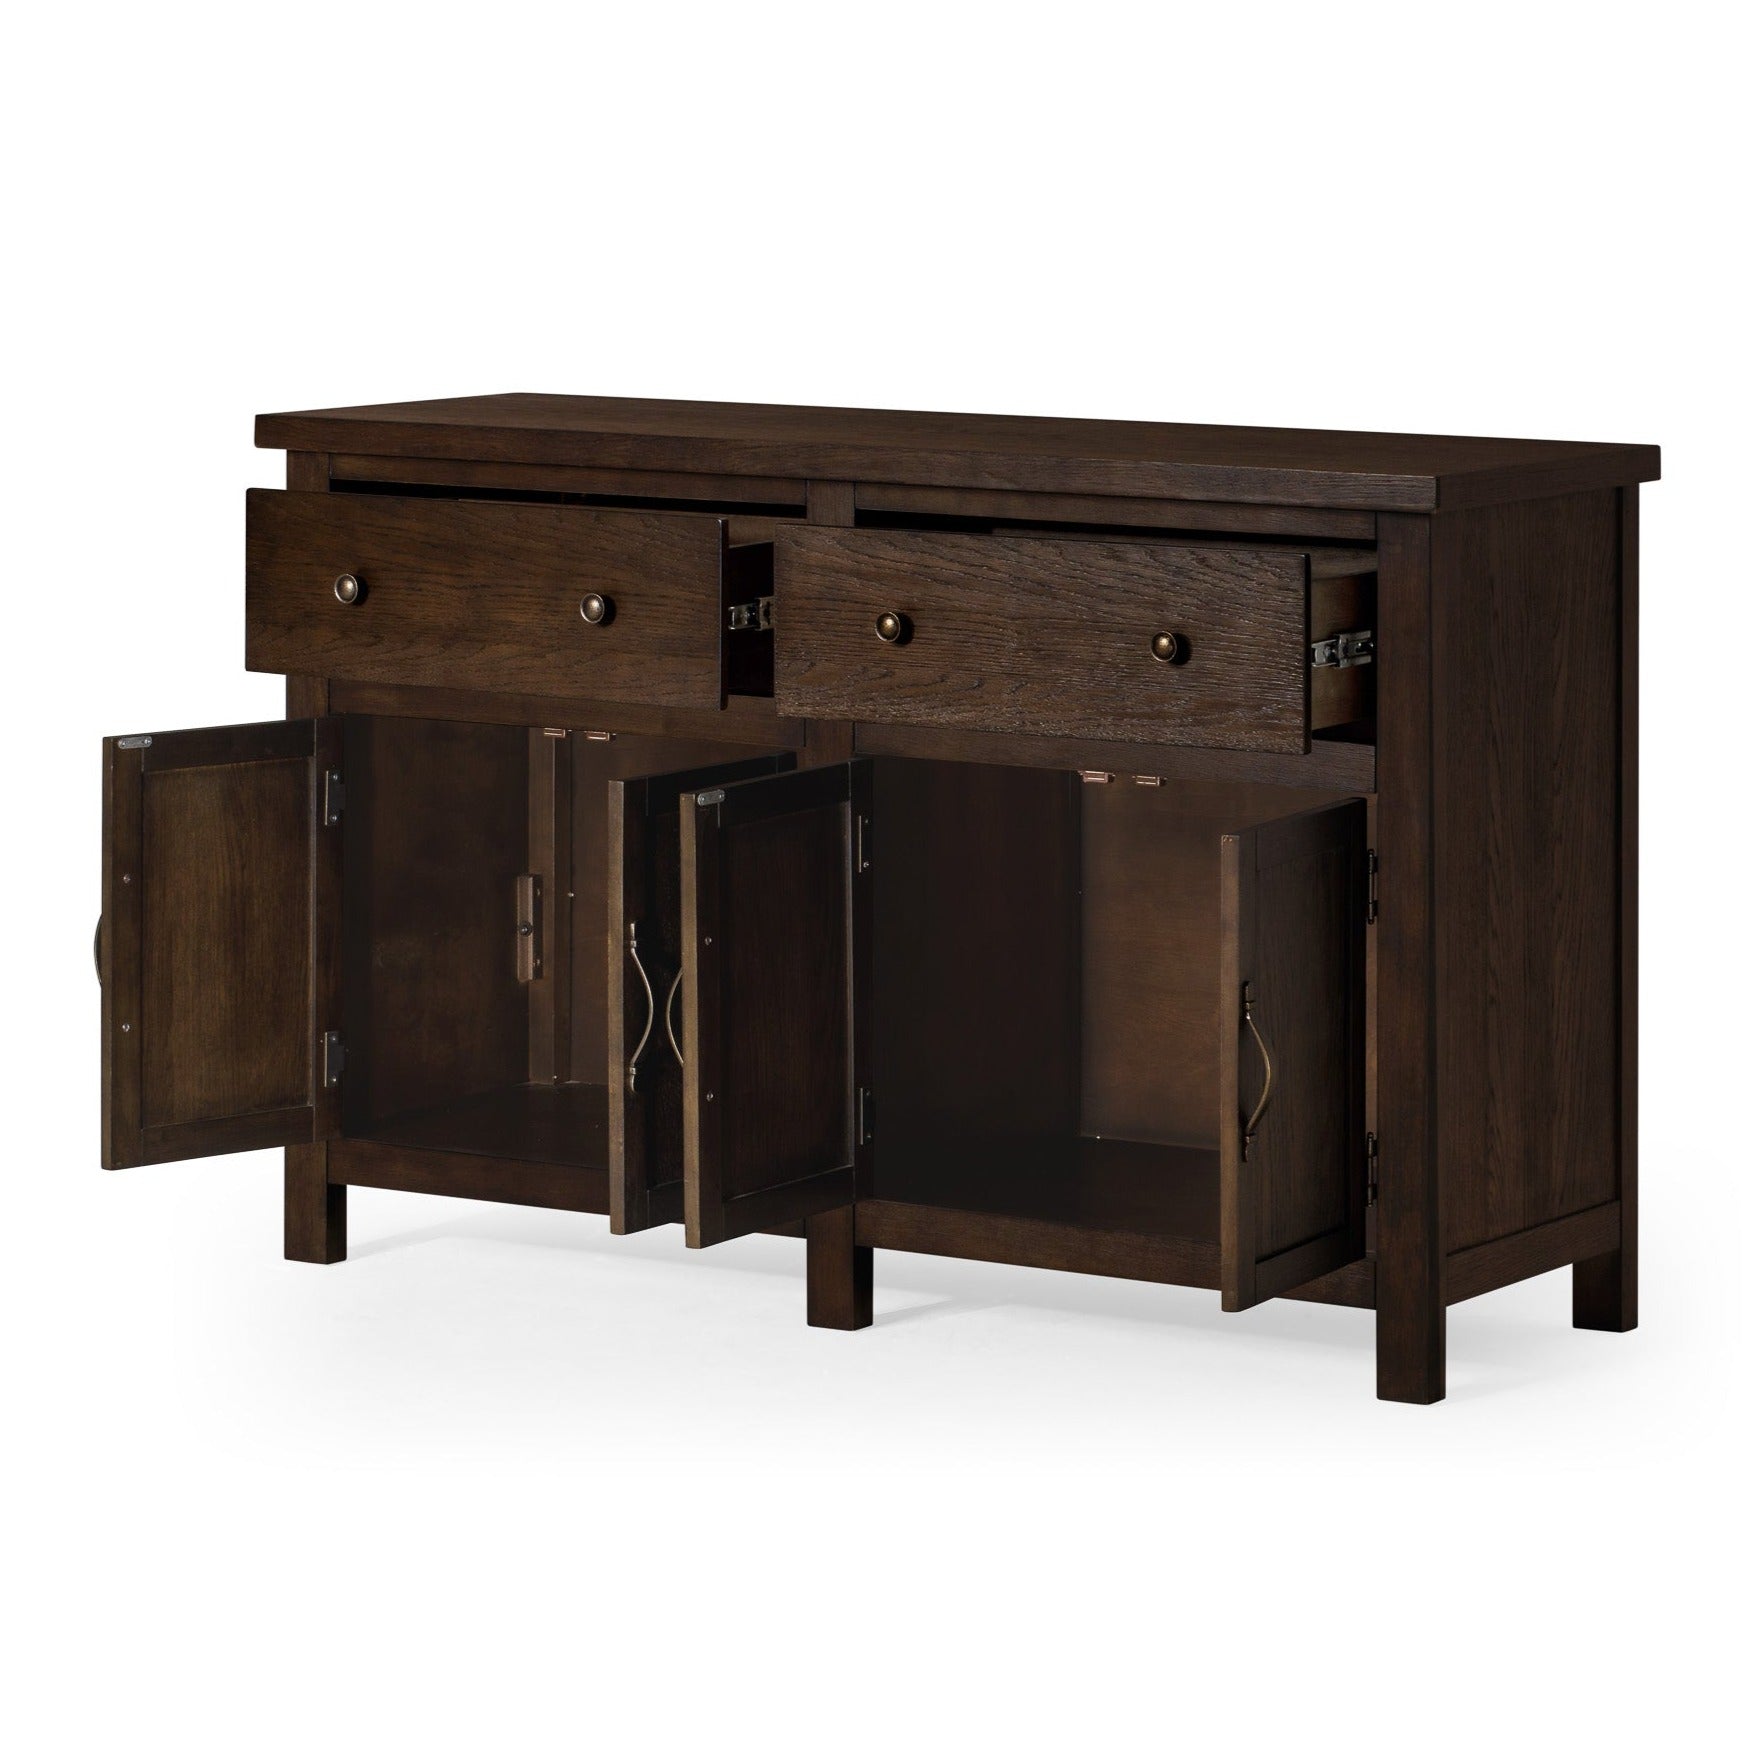 Felix Organic Wooden Sideboard in Weathered Brown Finish in Cabinets by Maven Lane